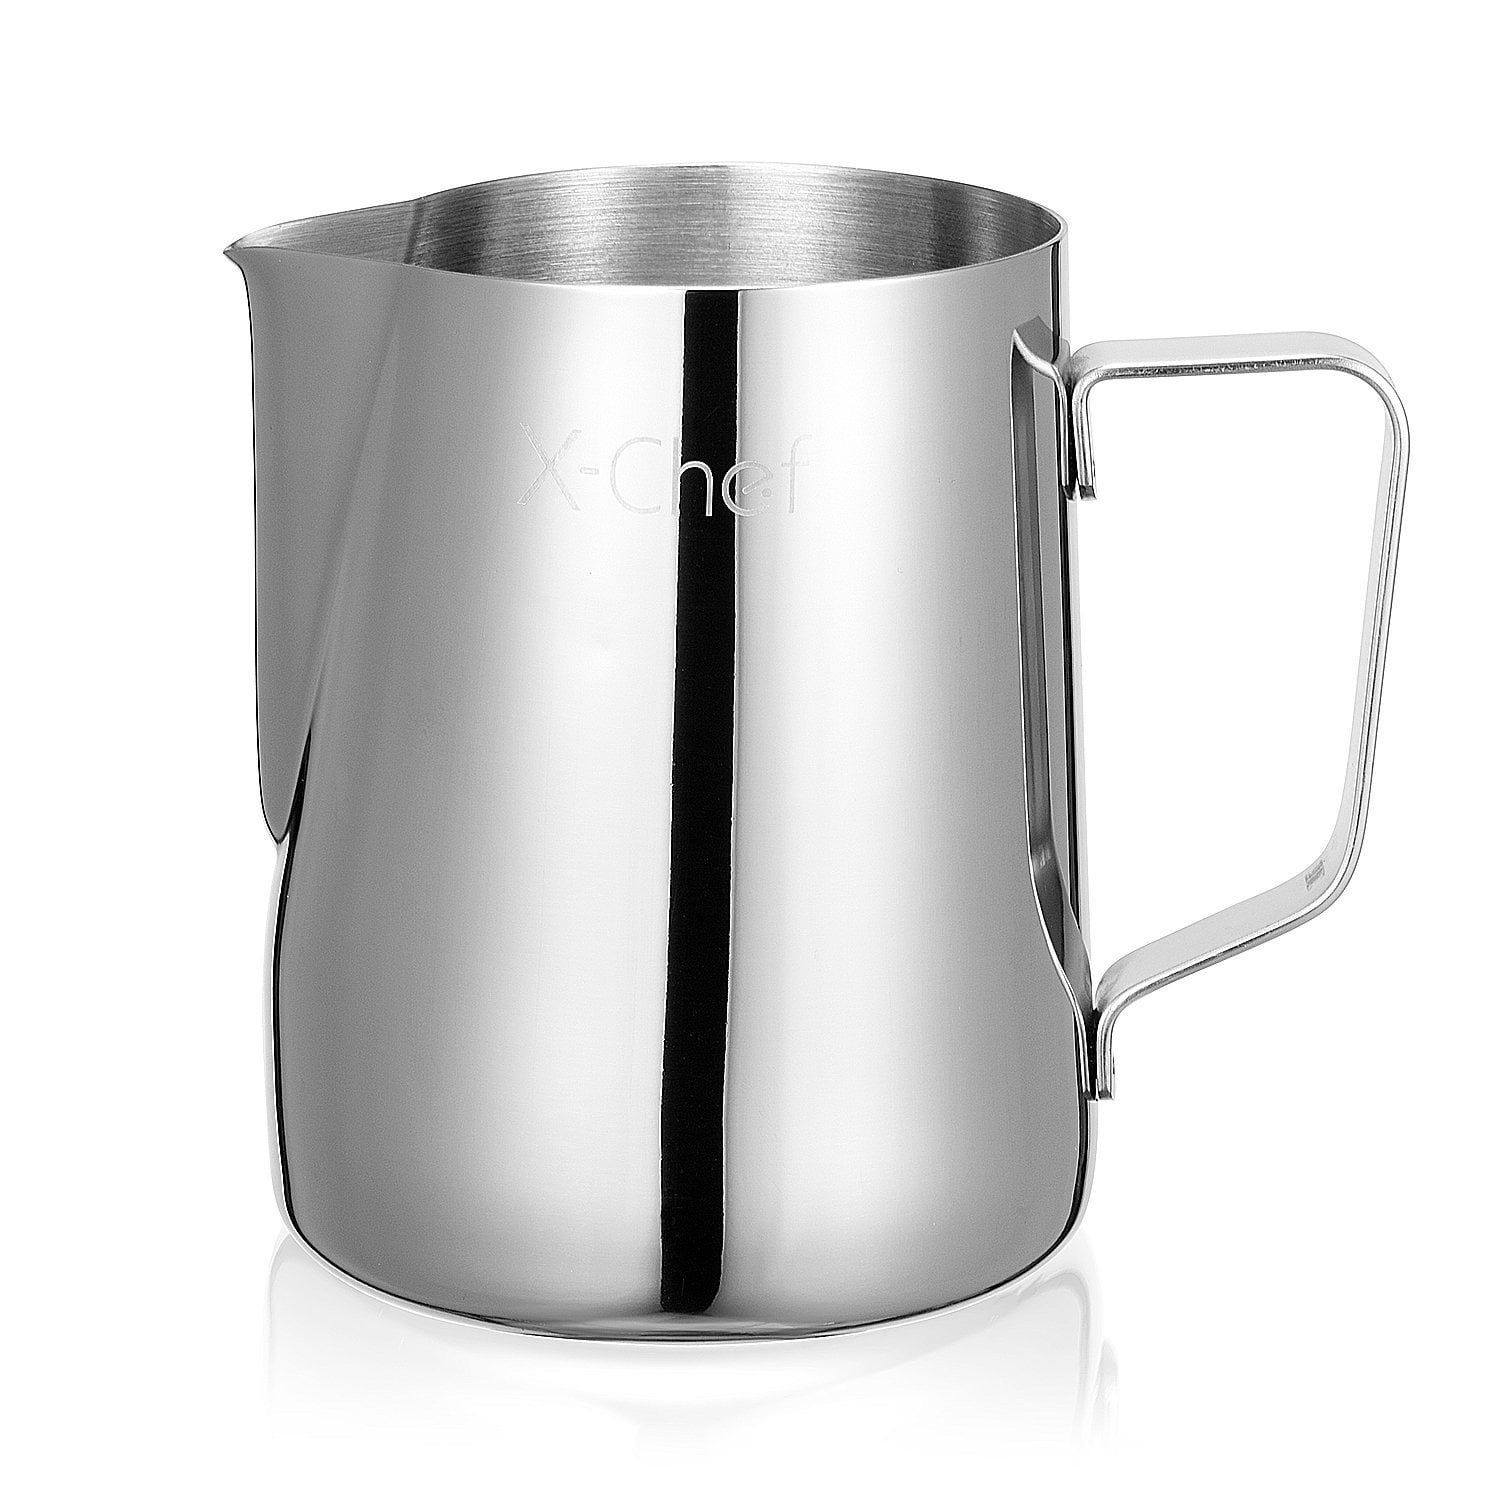 1pc 600ml Stainless Steel Milk Frothing Jug with Thermometer - Controlled  Temperature Coffee Tool Cup for Perfect Froth